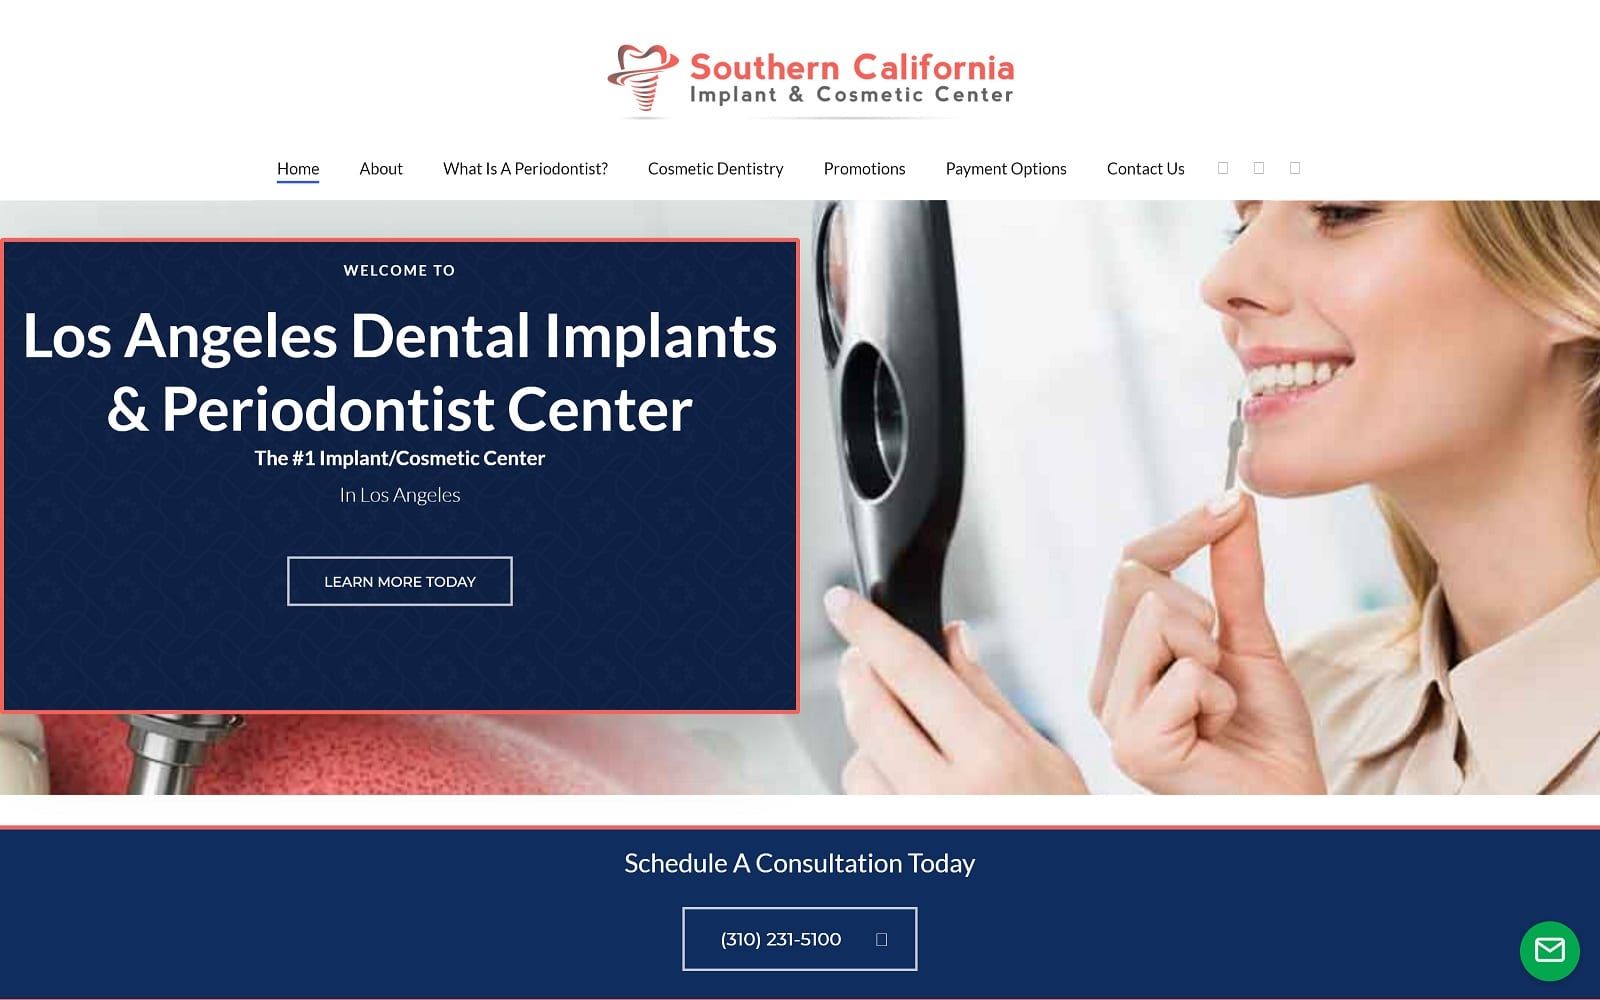 The screenshot of southern california implant centers - dental implants and periodontics in los angeles socalimplants. Com